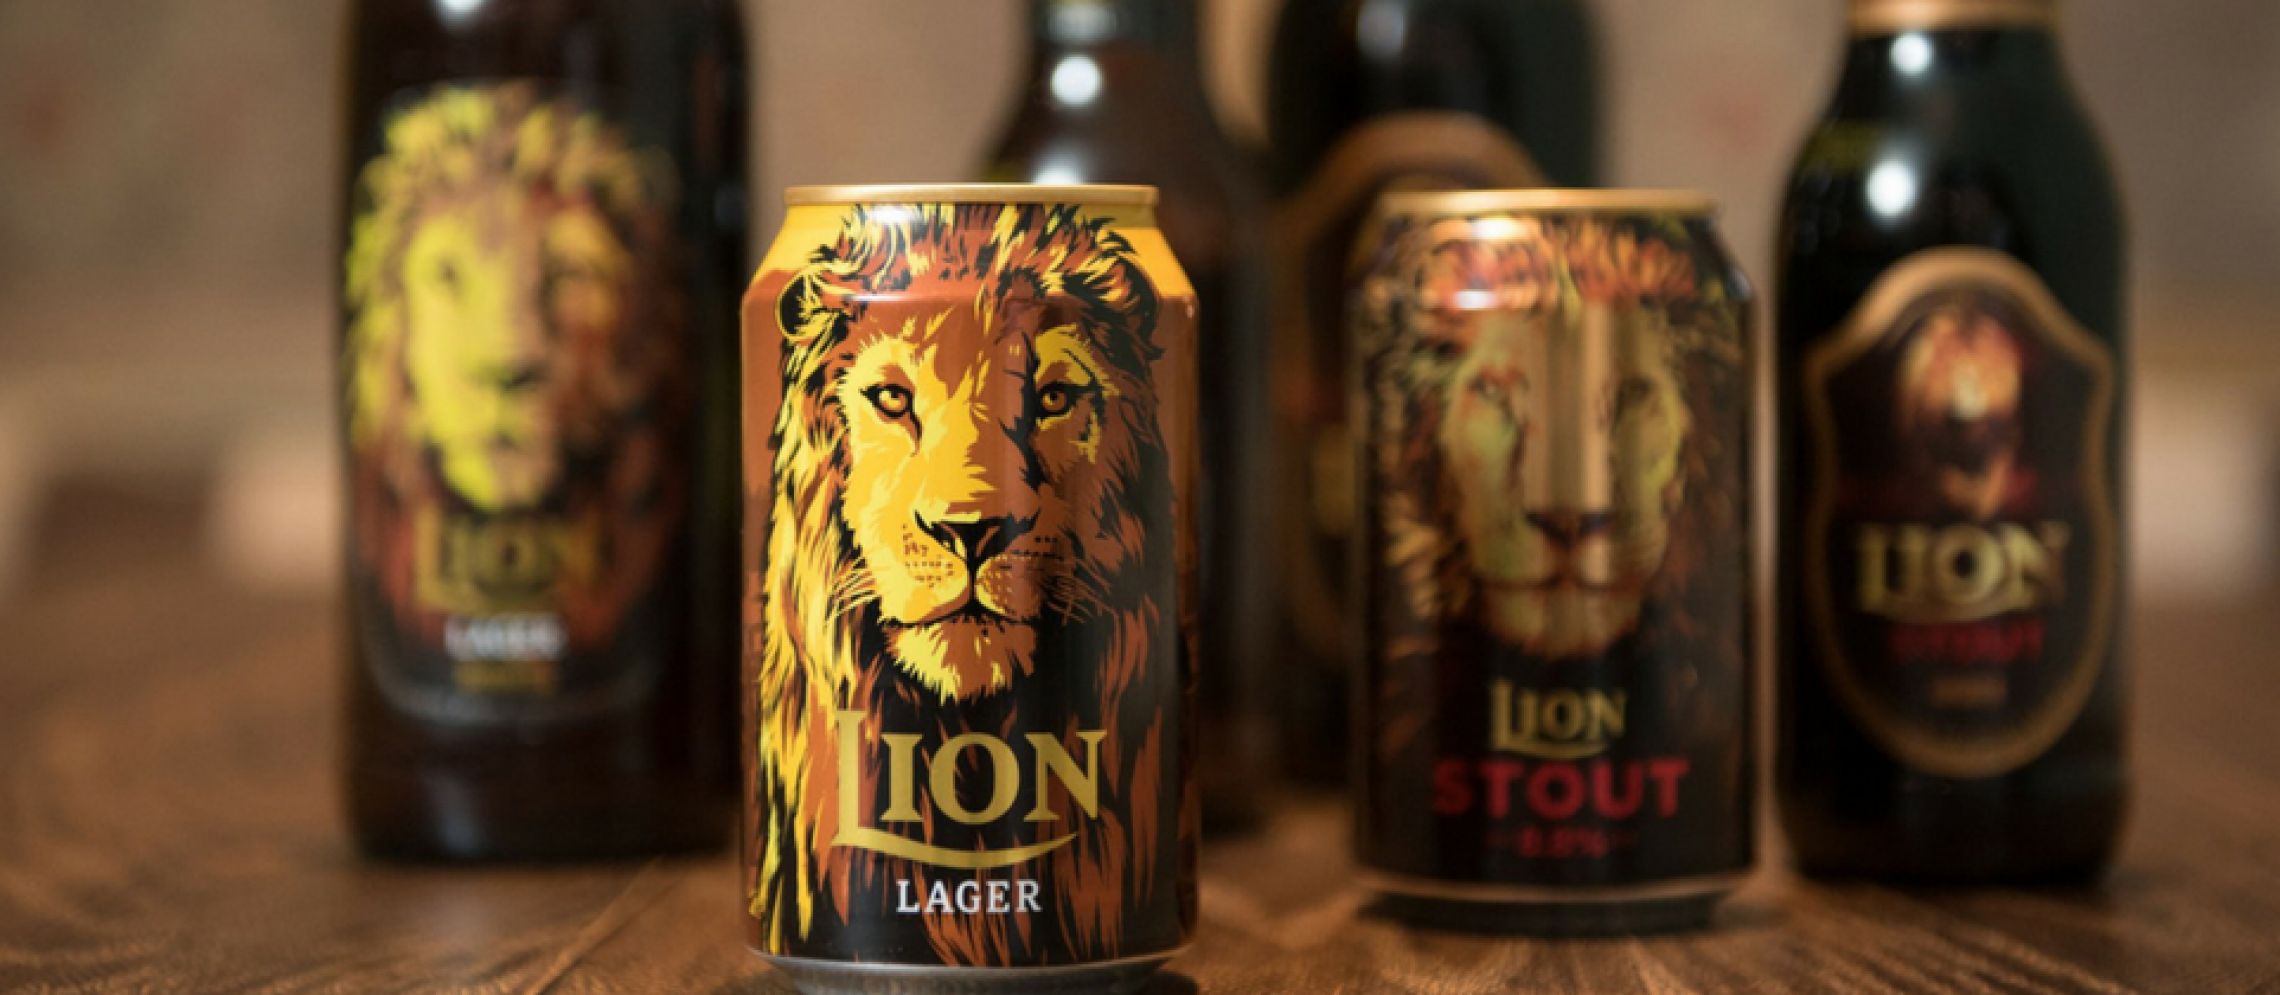 Photo for: A Drink That Roars